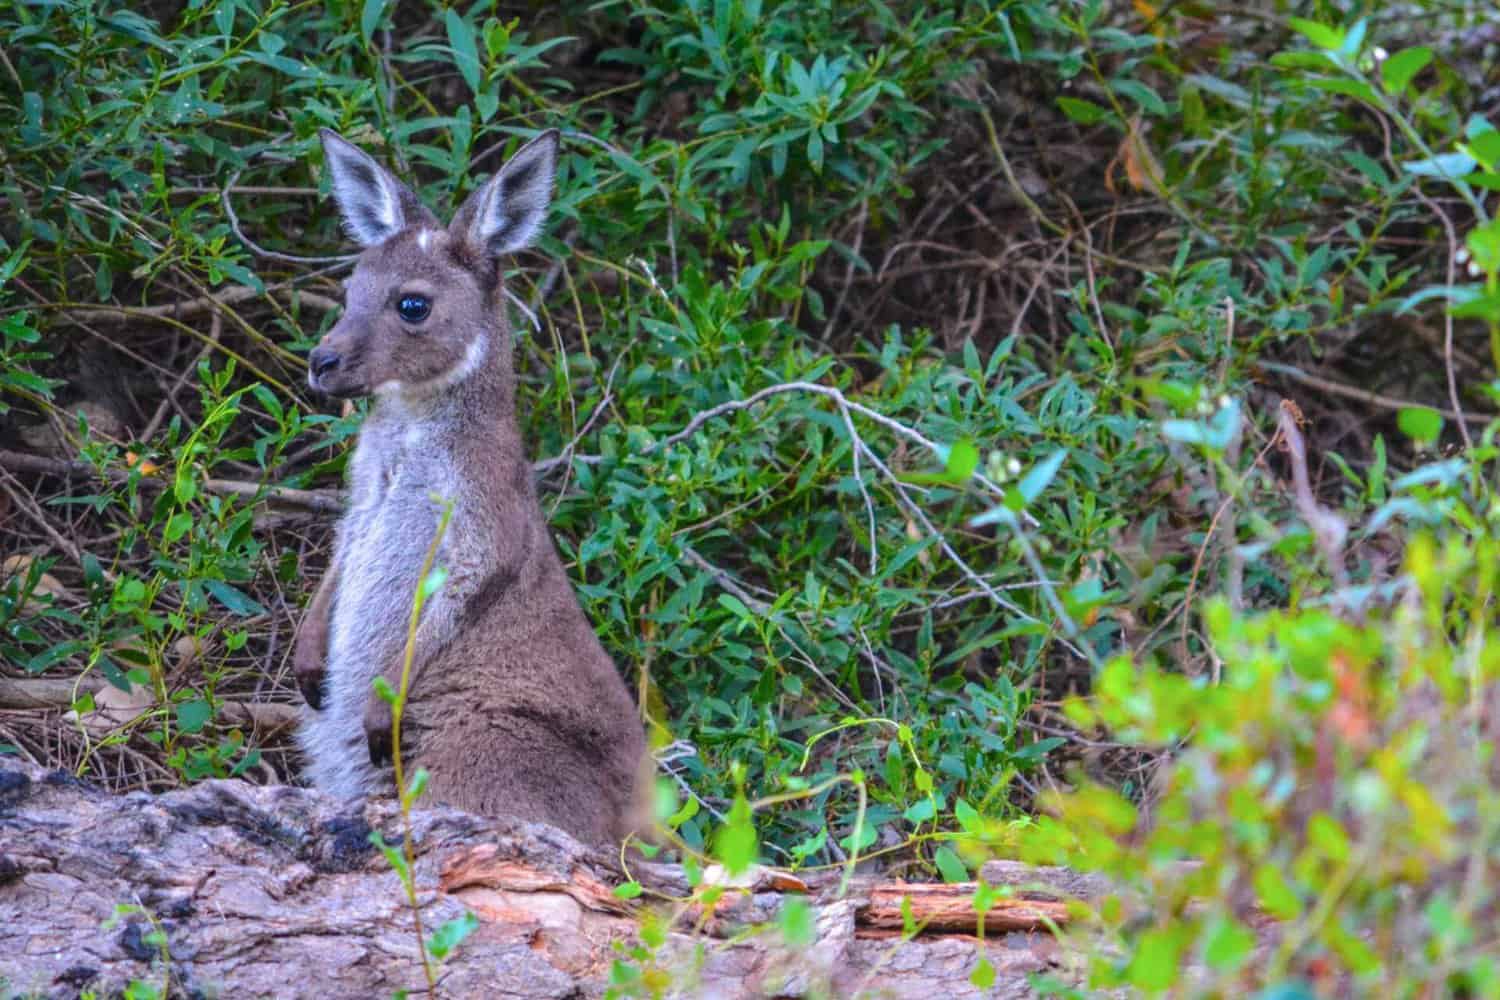 A curious kangaroo sits alert amongst the lush greenery, its ears perked and eyes watchful.